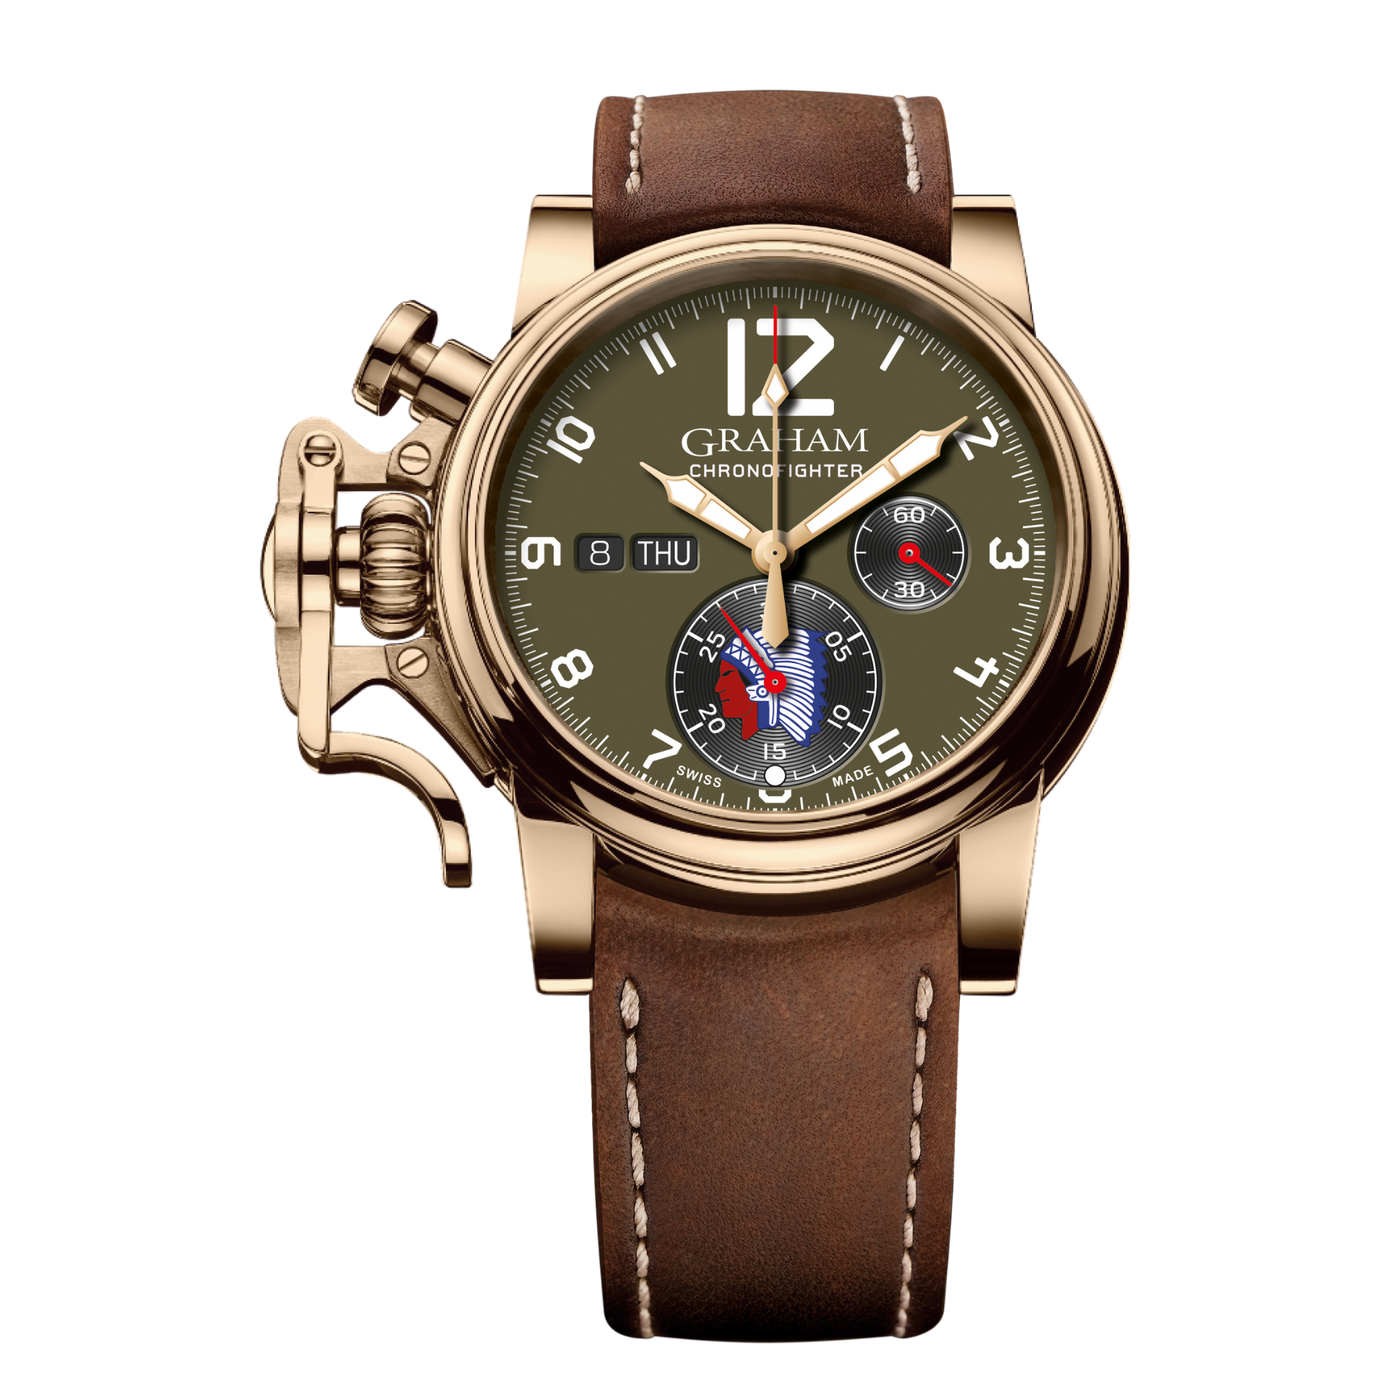 CHRONOFIGHTER VINTAGE OVERLORD ANNIVERSARY 75 YEARS